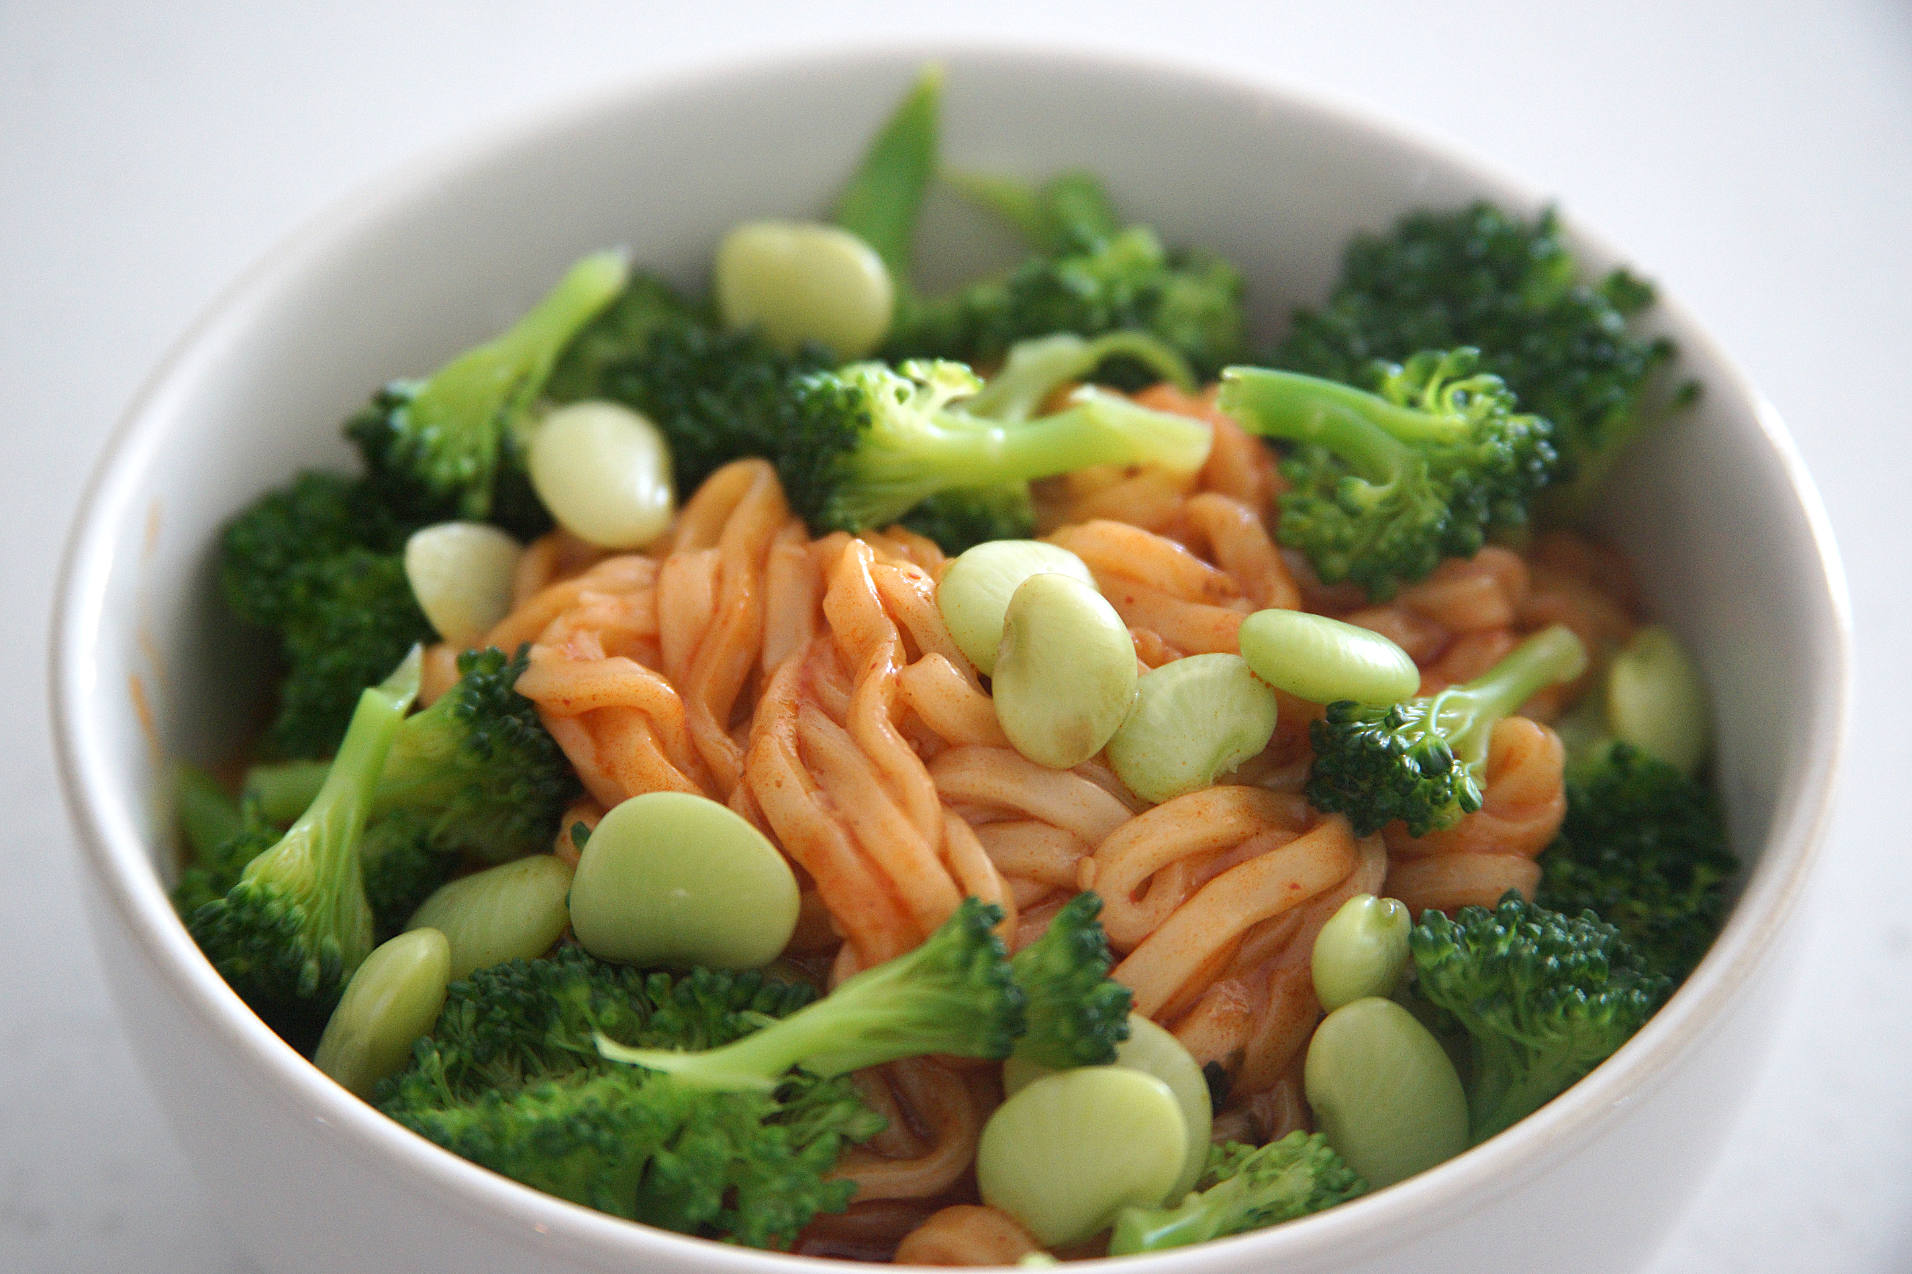 Buldak fire noodles with broccoli and lima beans